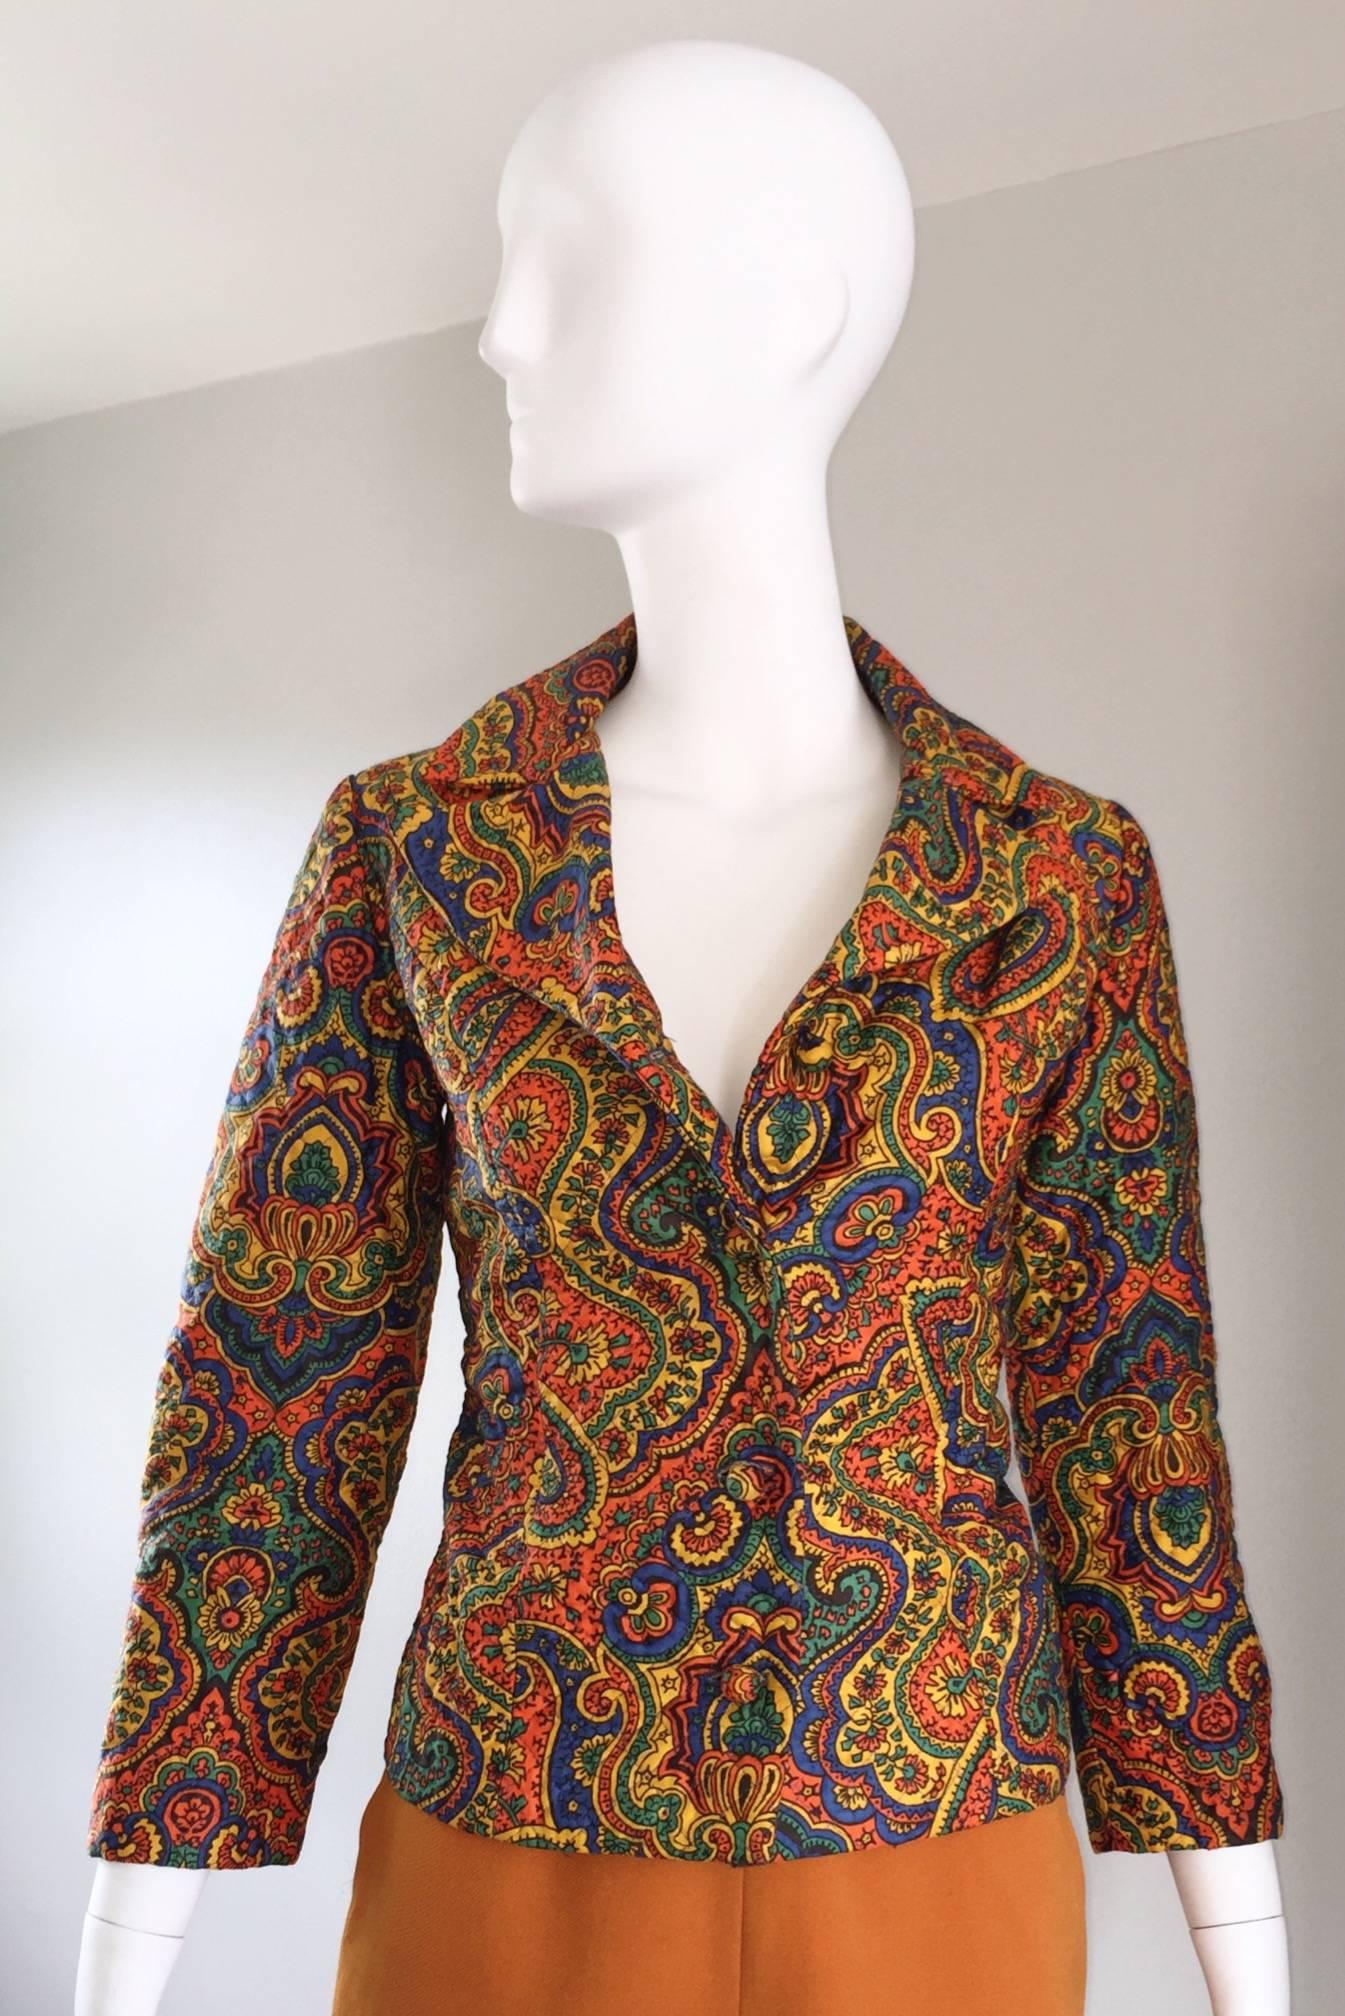 Brown Rare Vintage Wippette 1960s Mod Paisley Cotton Quilted Psychedelic Blazer Jacket